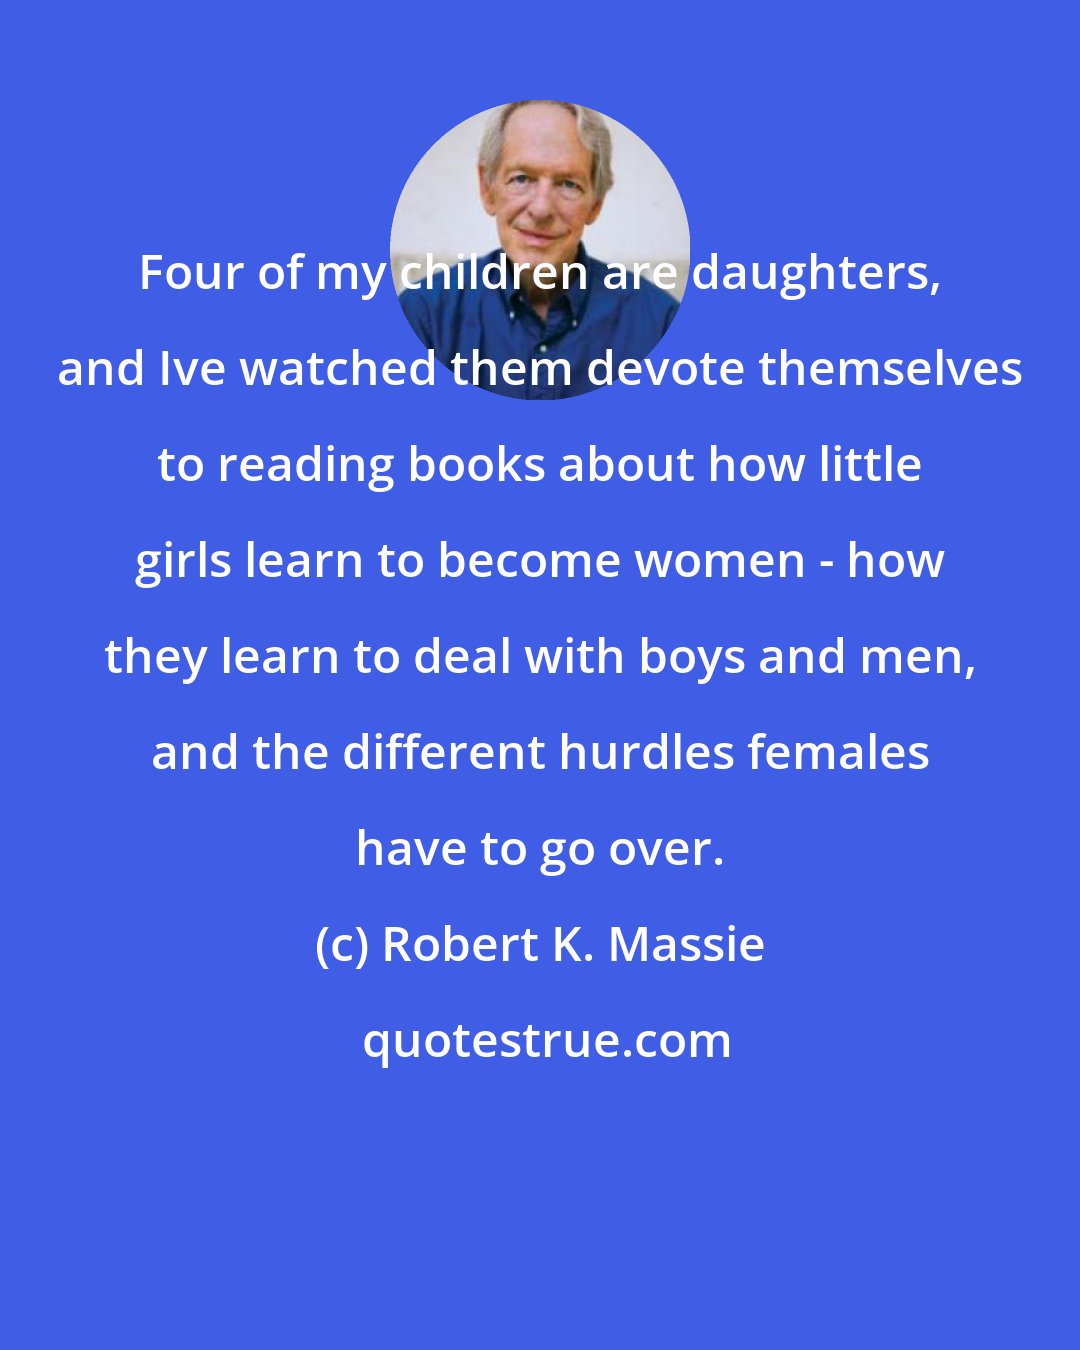 Robert K. Massie: Four of my children are daughters, and Ive watched them devote themselves to reading books about how little girls learn to become women - how they learn to deal with boys and men, and the different hurdles females have to go over.